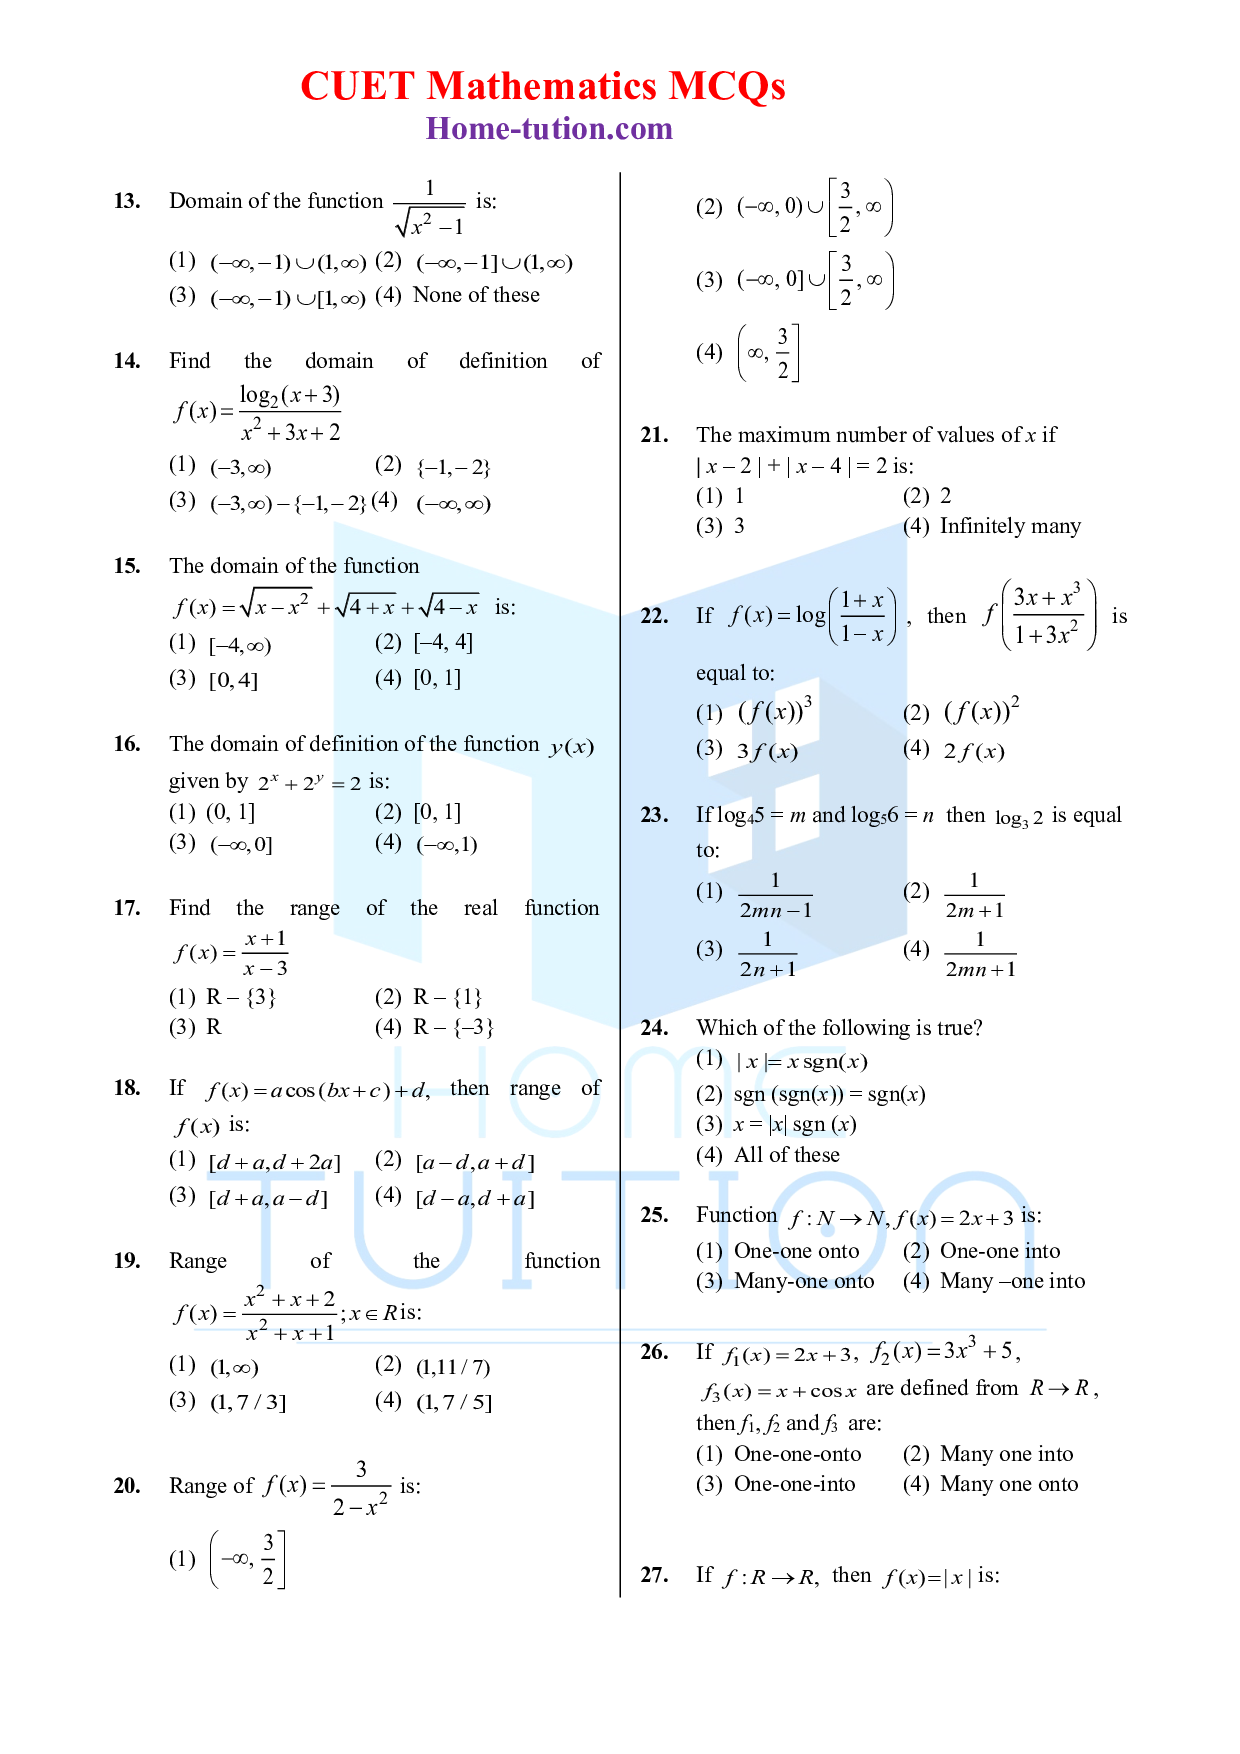 CUET MCQ Questions For Maths Chapter-13 Relation and Function